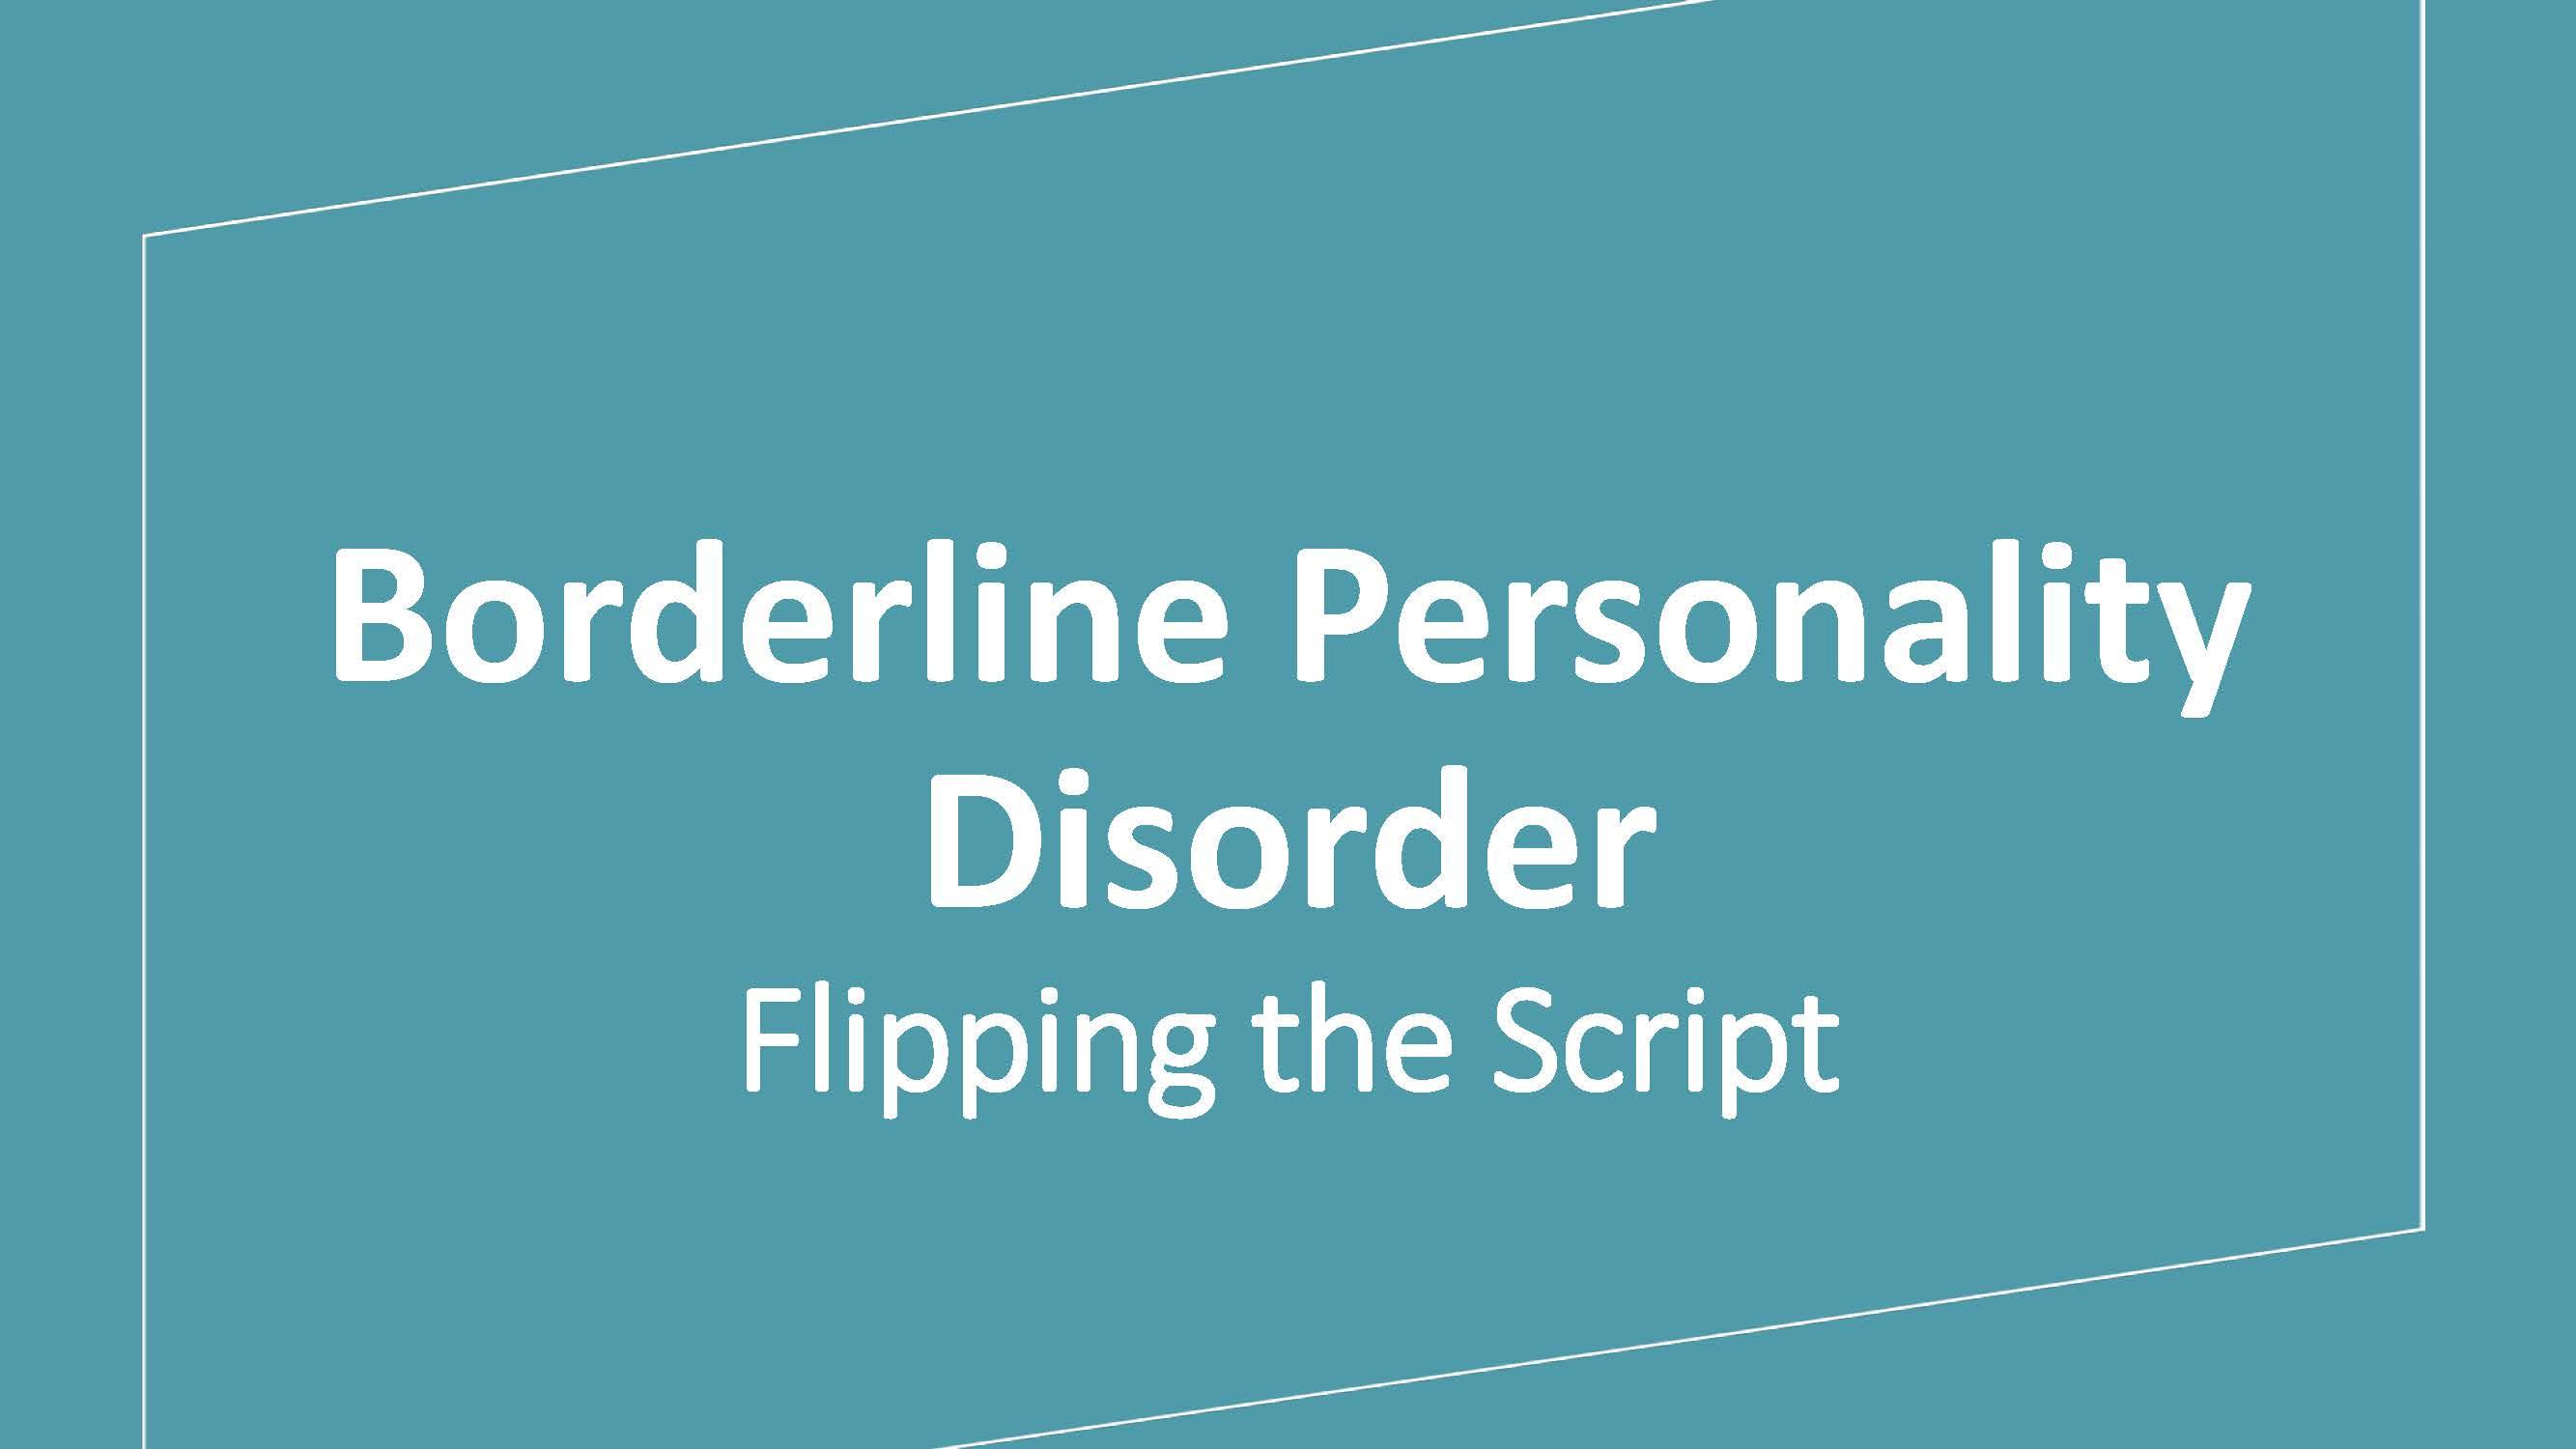 Borderline Personality Disorder: Flipping the Script